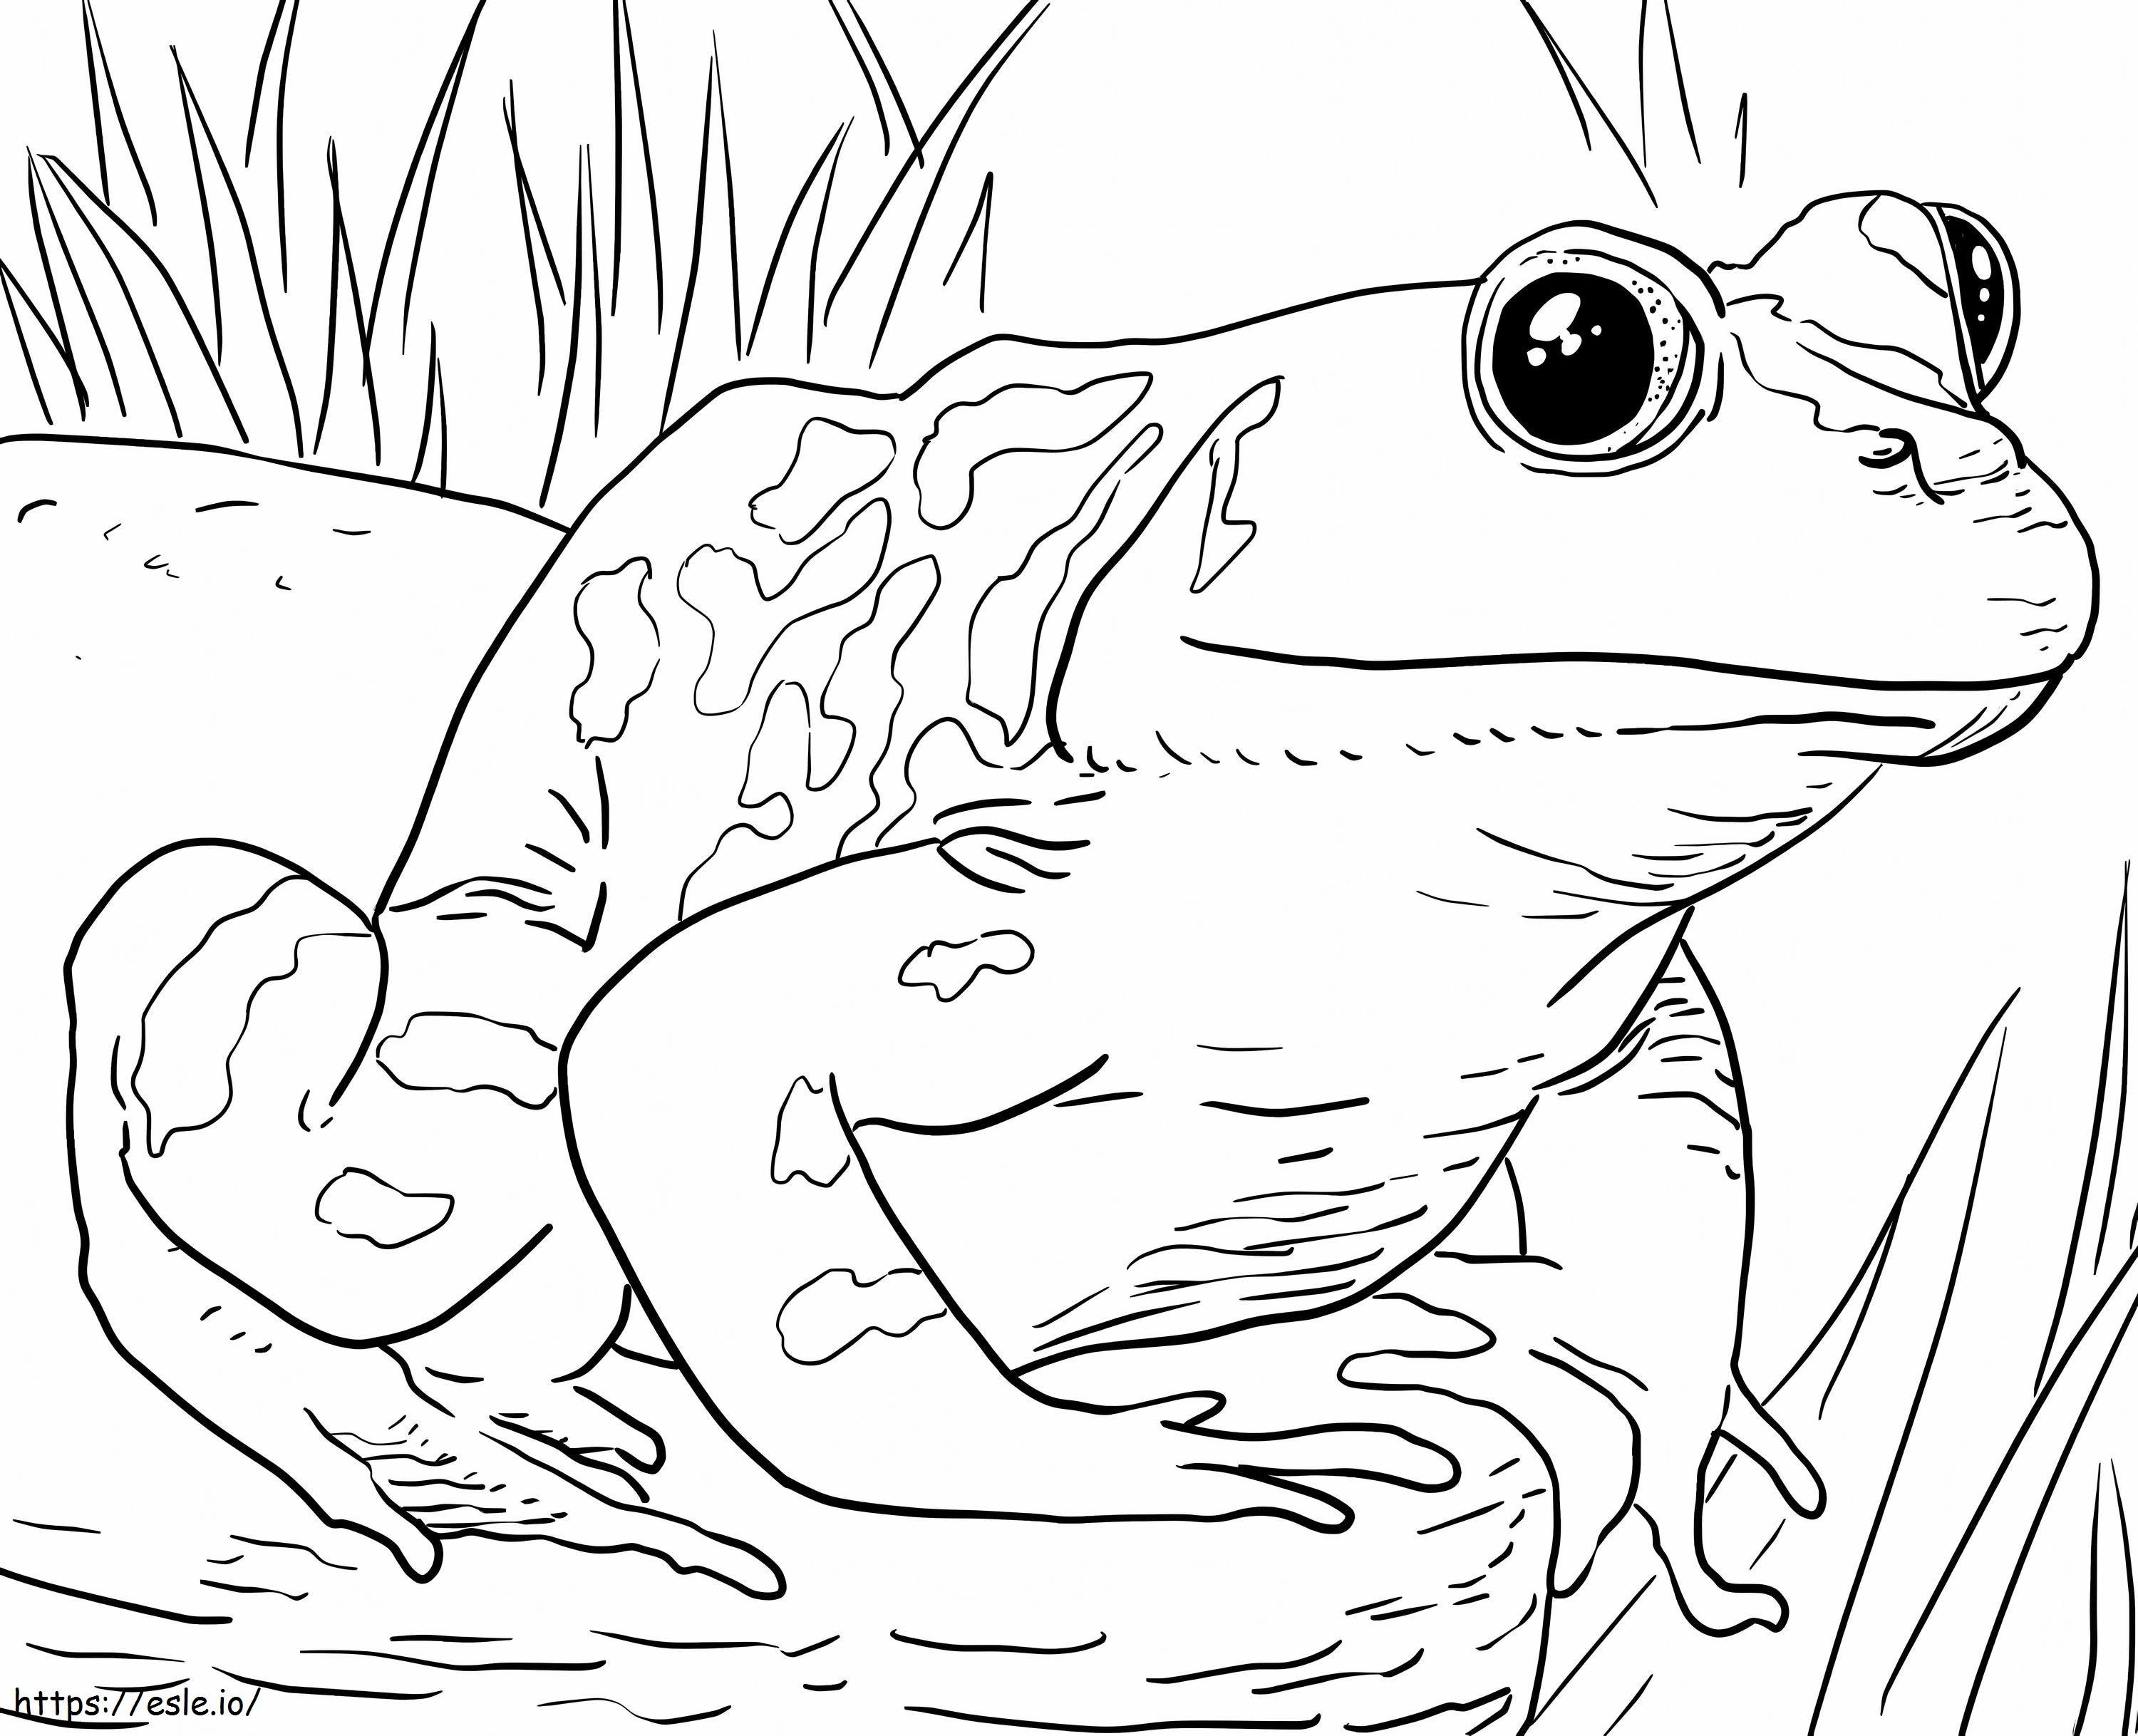 Frog In The Zoo coloring page